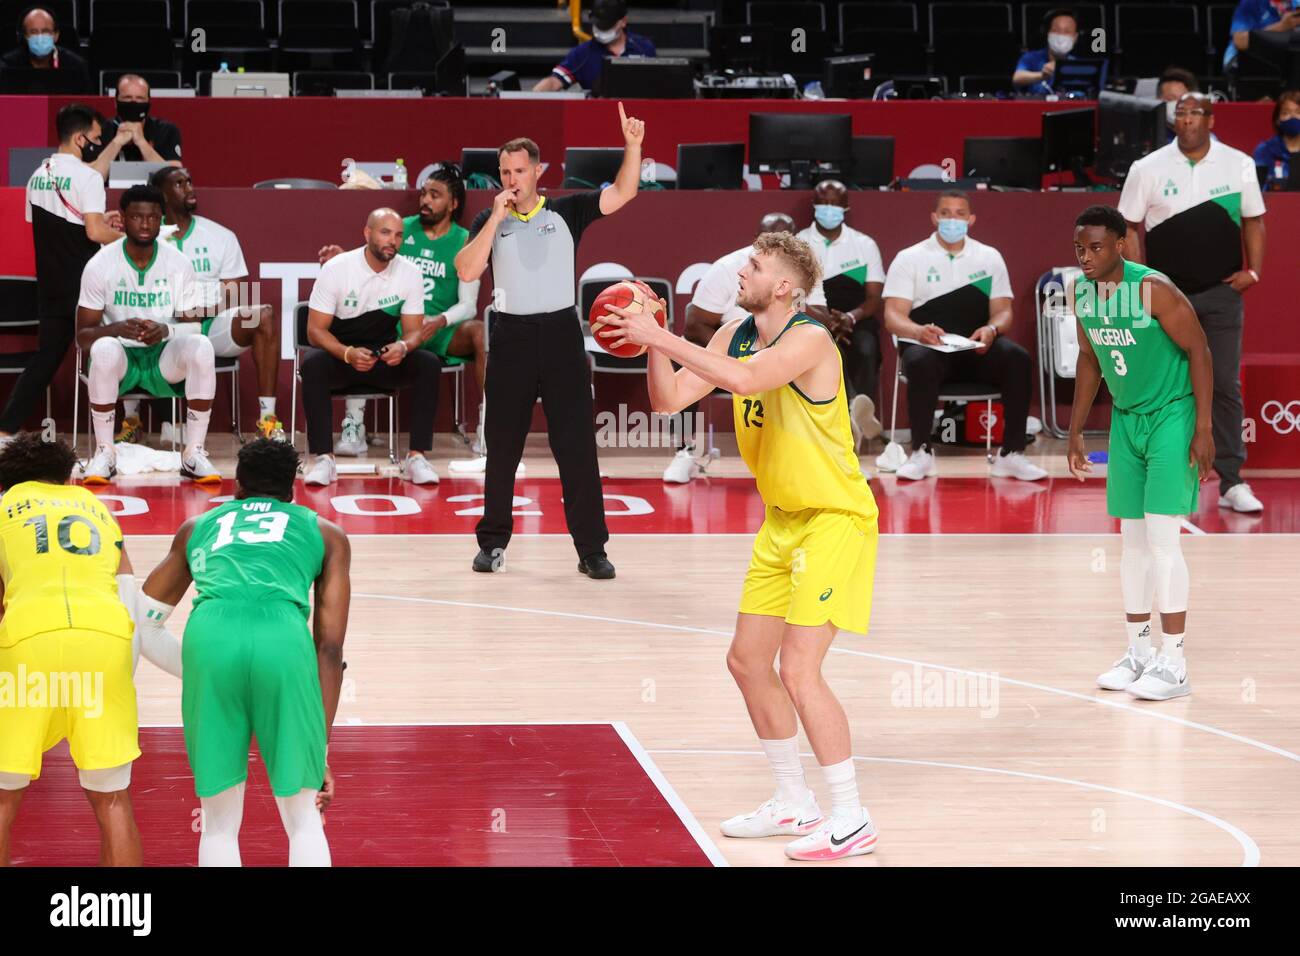 Tokyo, Japan, 25 July, 2021. Jock Landale of Team Australia shoots from the free throw line during the Men's Basketball preliminary Round Group B  - Match 3 between Australia and Nigeria on Day 2 of the Tokyo 2020 Olympic Games. Credit: Pete Dovgan/Speed Media/Alamy Live News Stock Photo